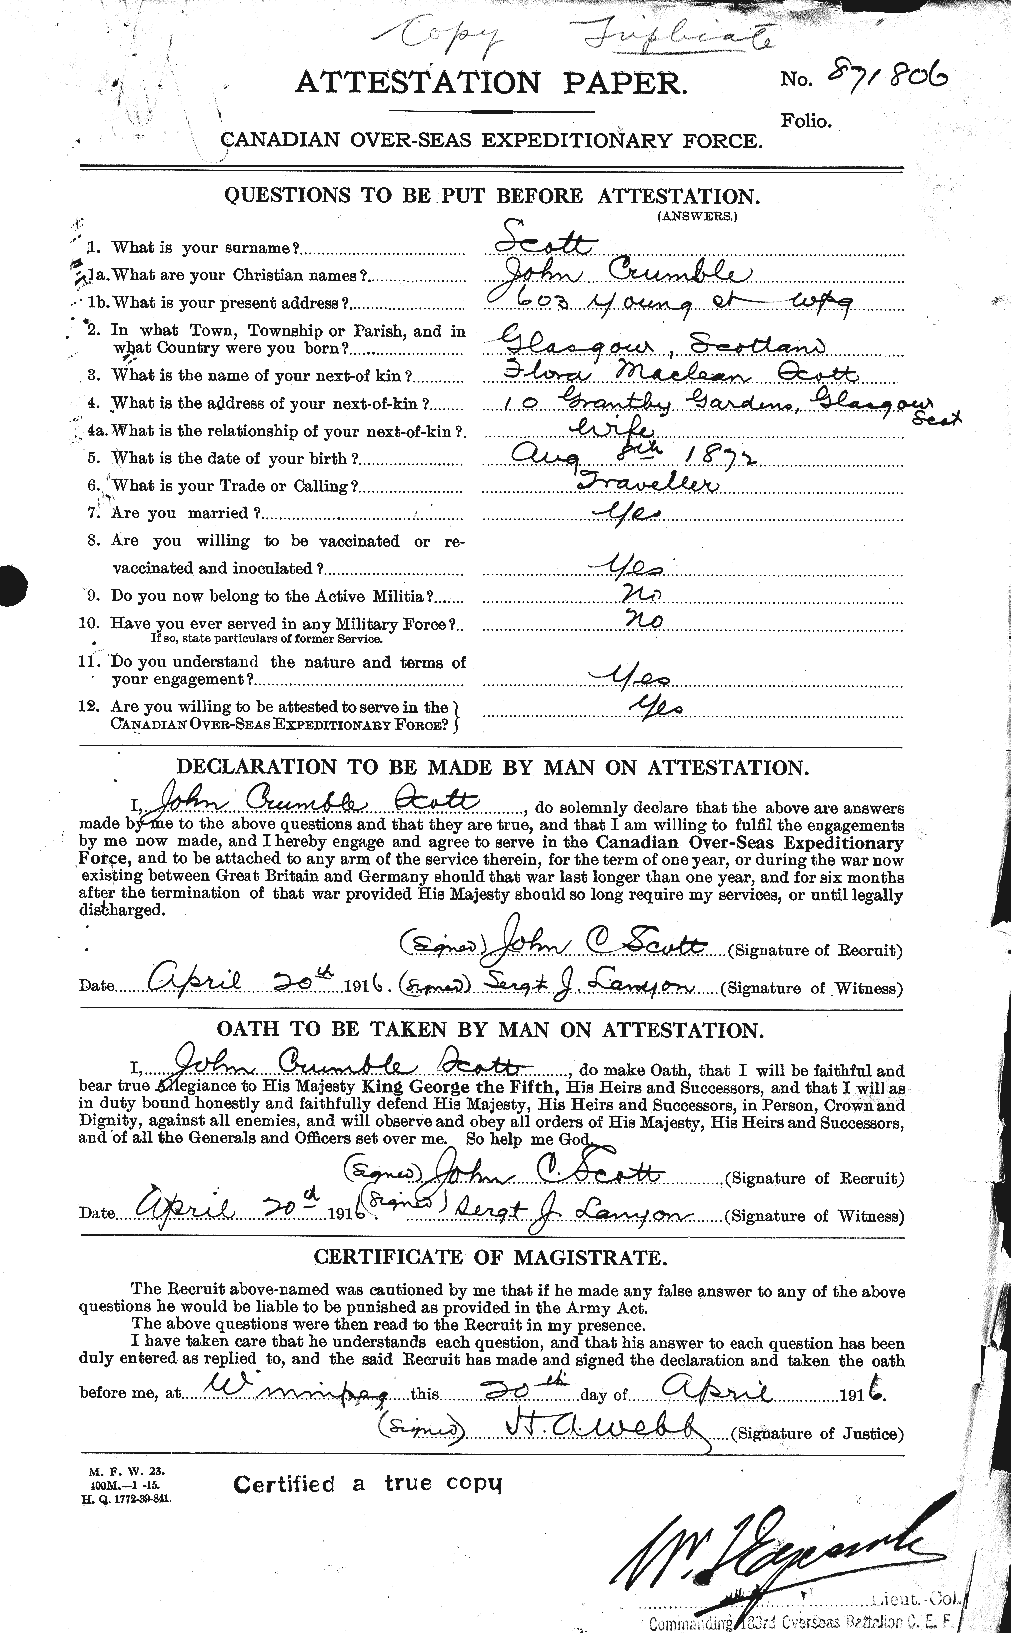 Personnel Records of the First World War - CEF 084646a